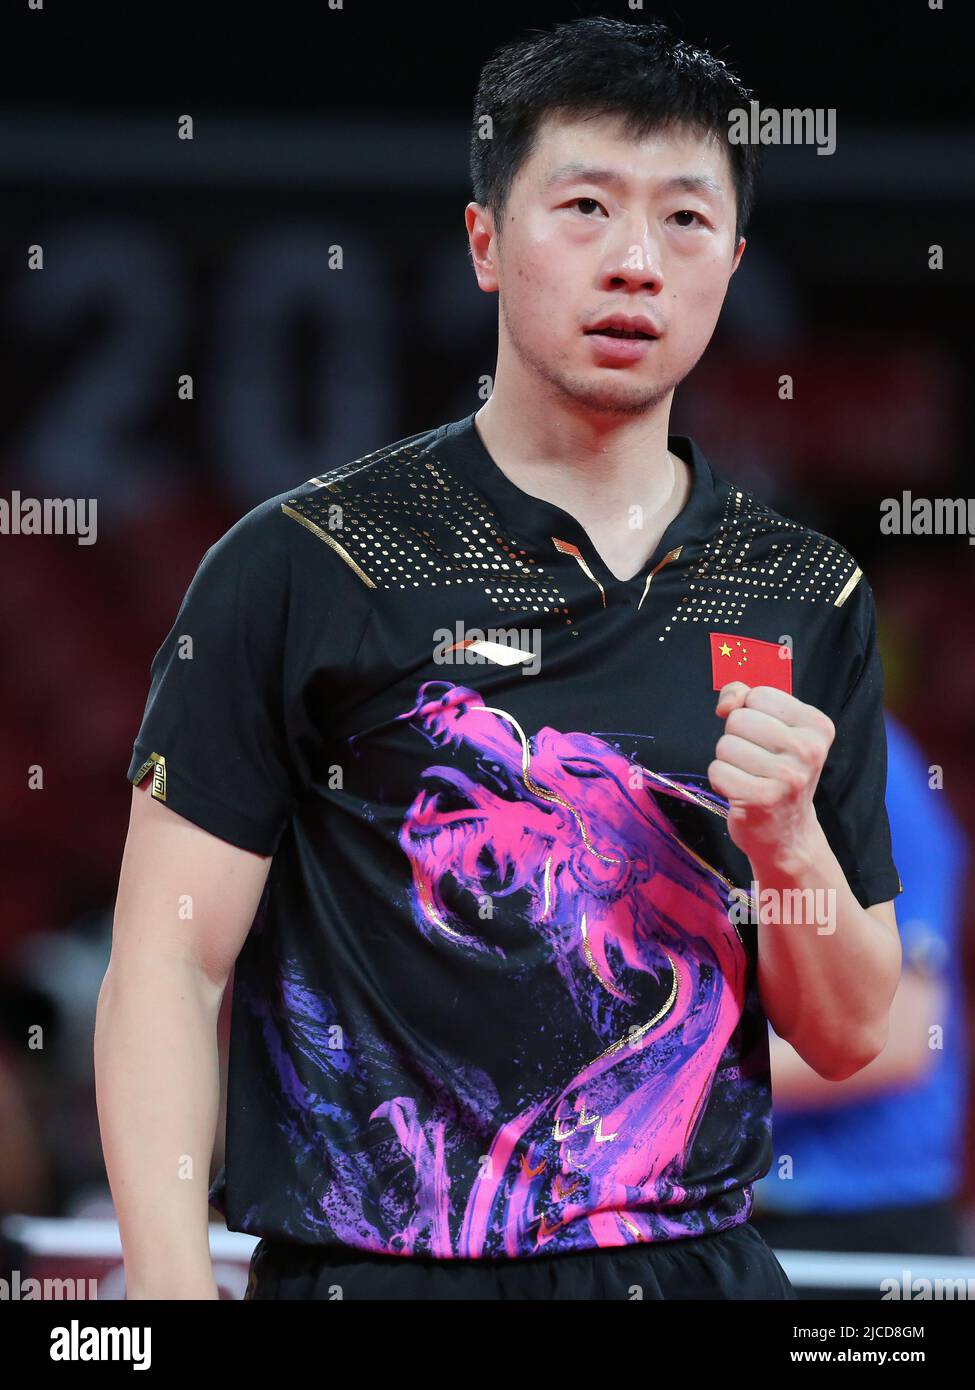 JULY 30th, 2021 - TOKYO, JAPAN: Ma Long of China wins the Gold Medal in the Table Tennis Men's Singles at the Tokyo 2020 Olympic Games (Photo by Micka Stock Photo